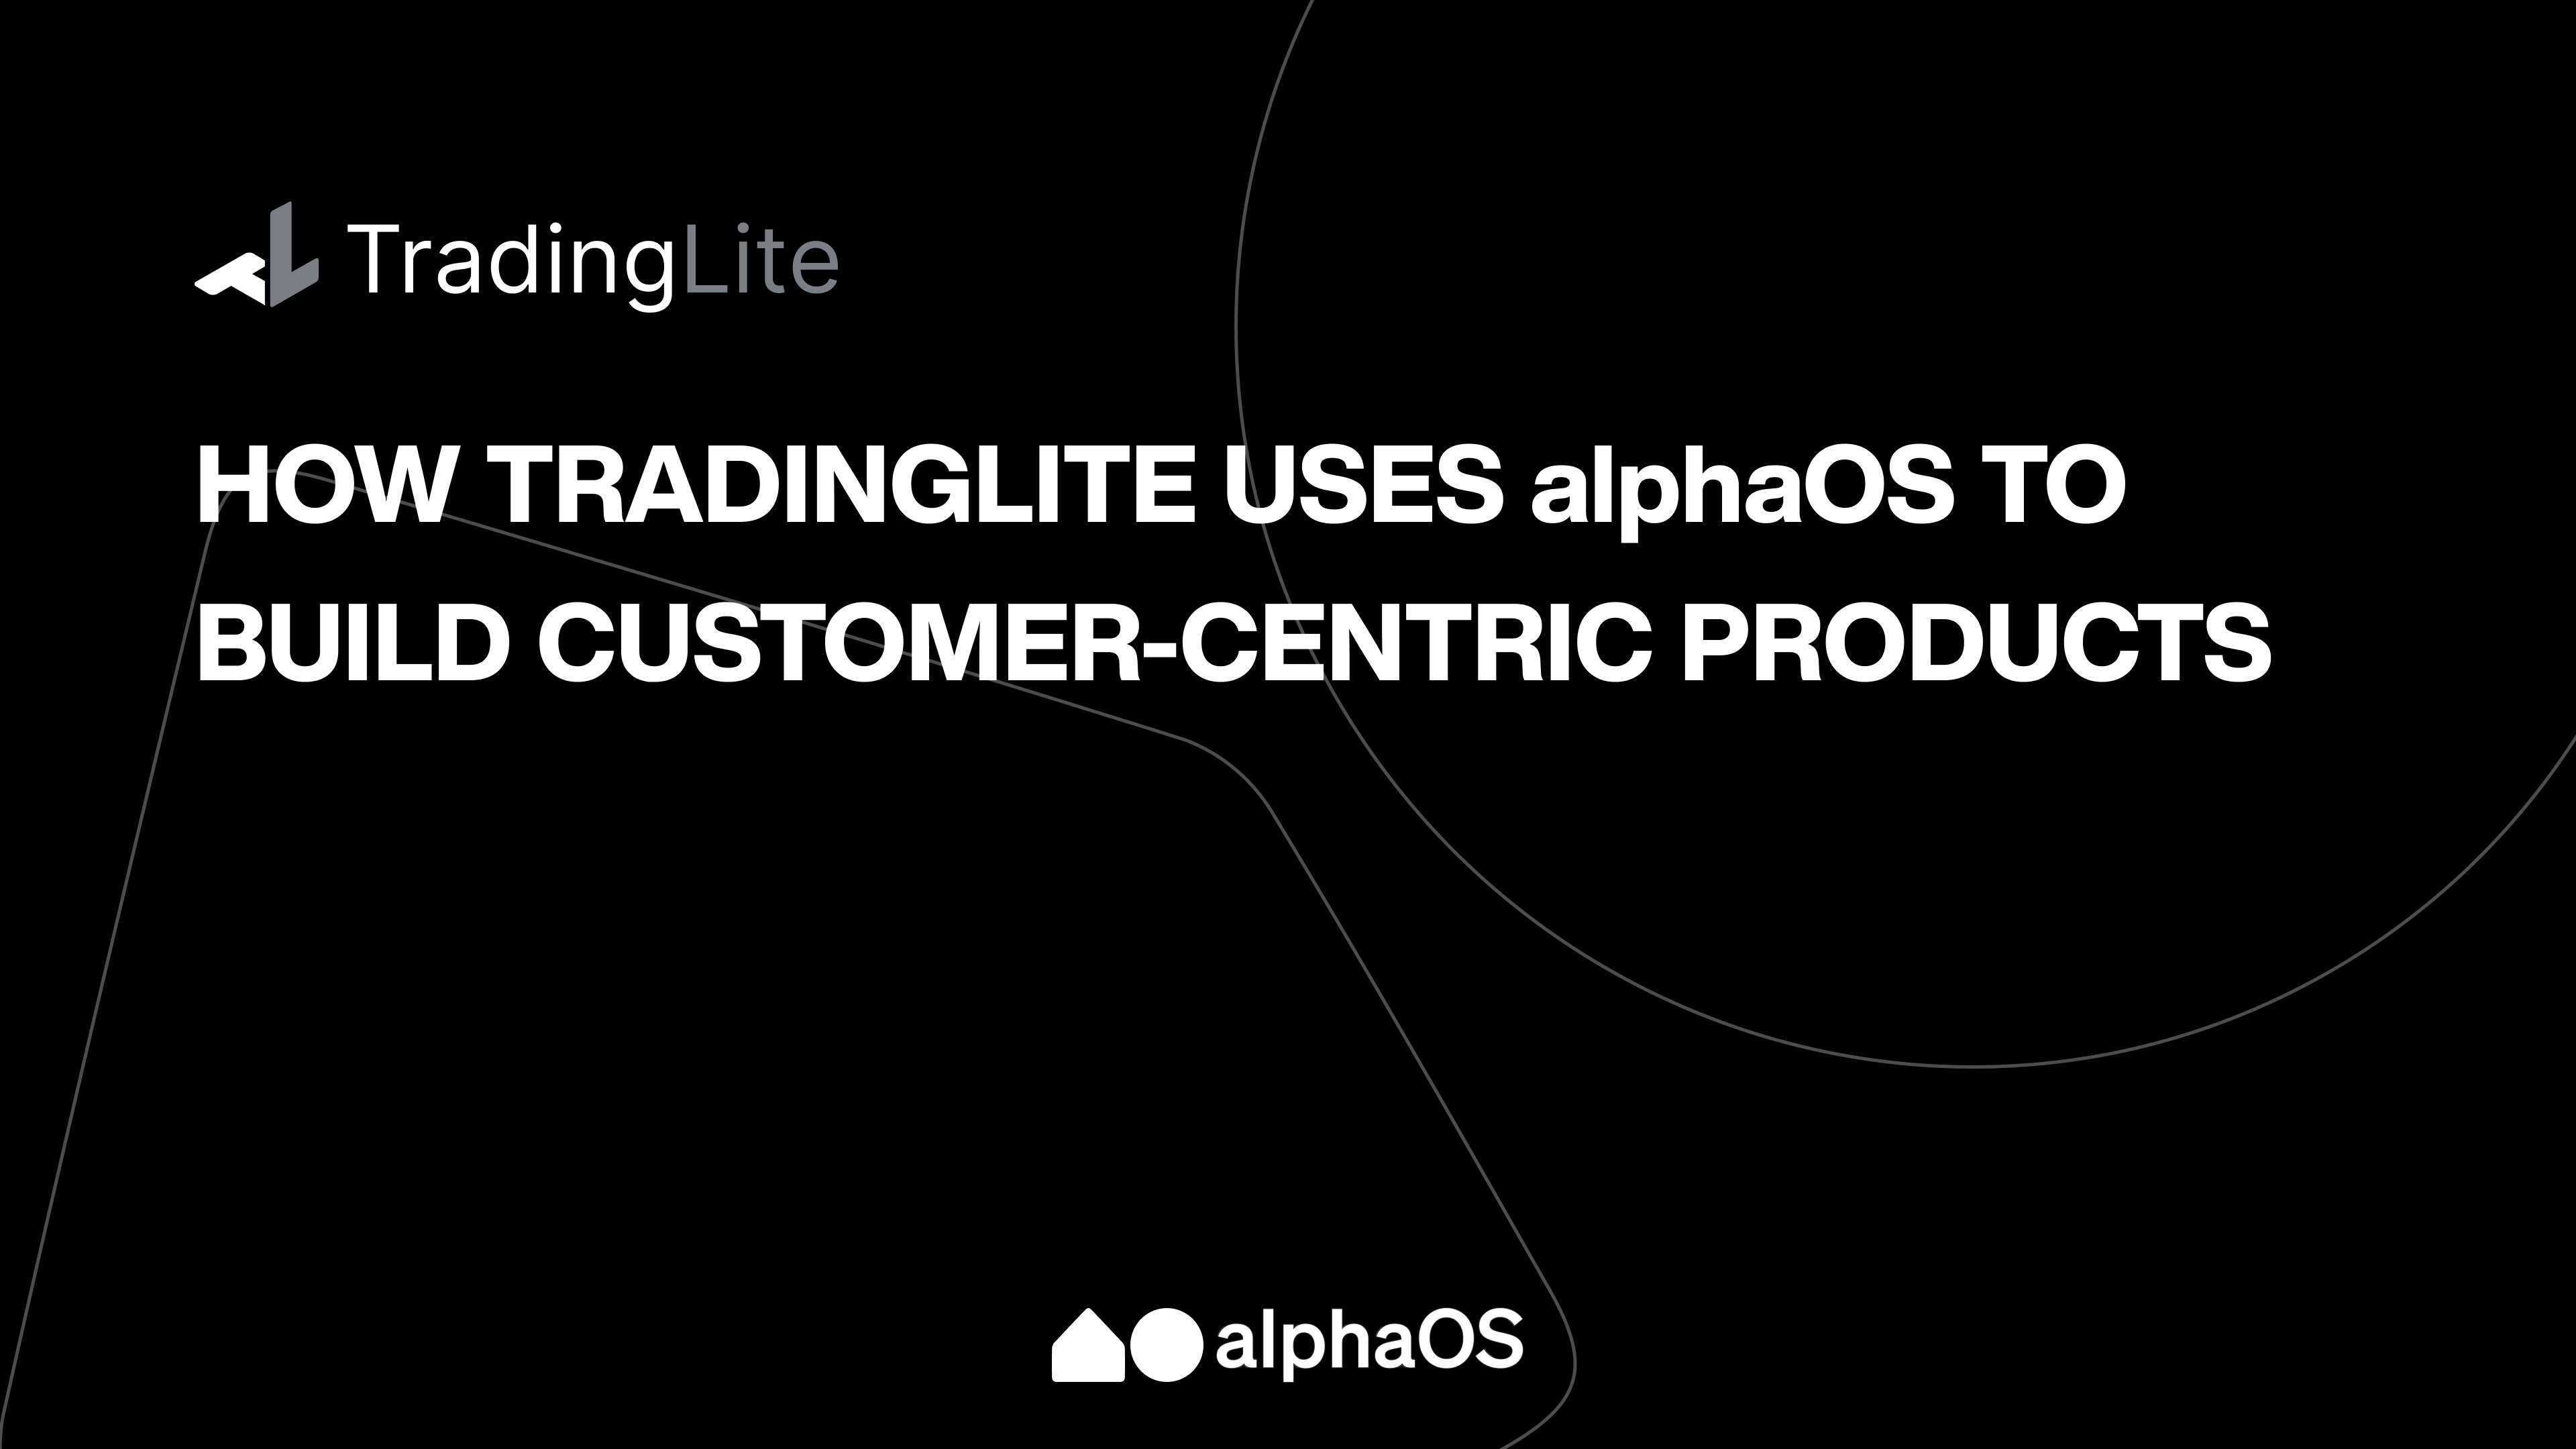 How TradingLite uses alphaOS to build customer-centric products